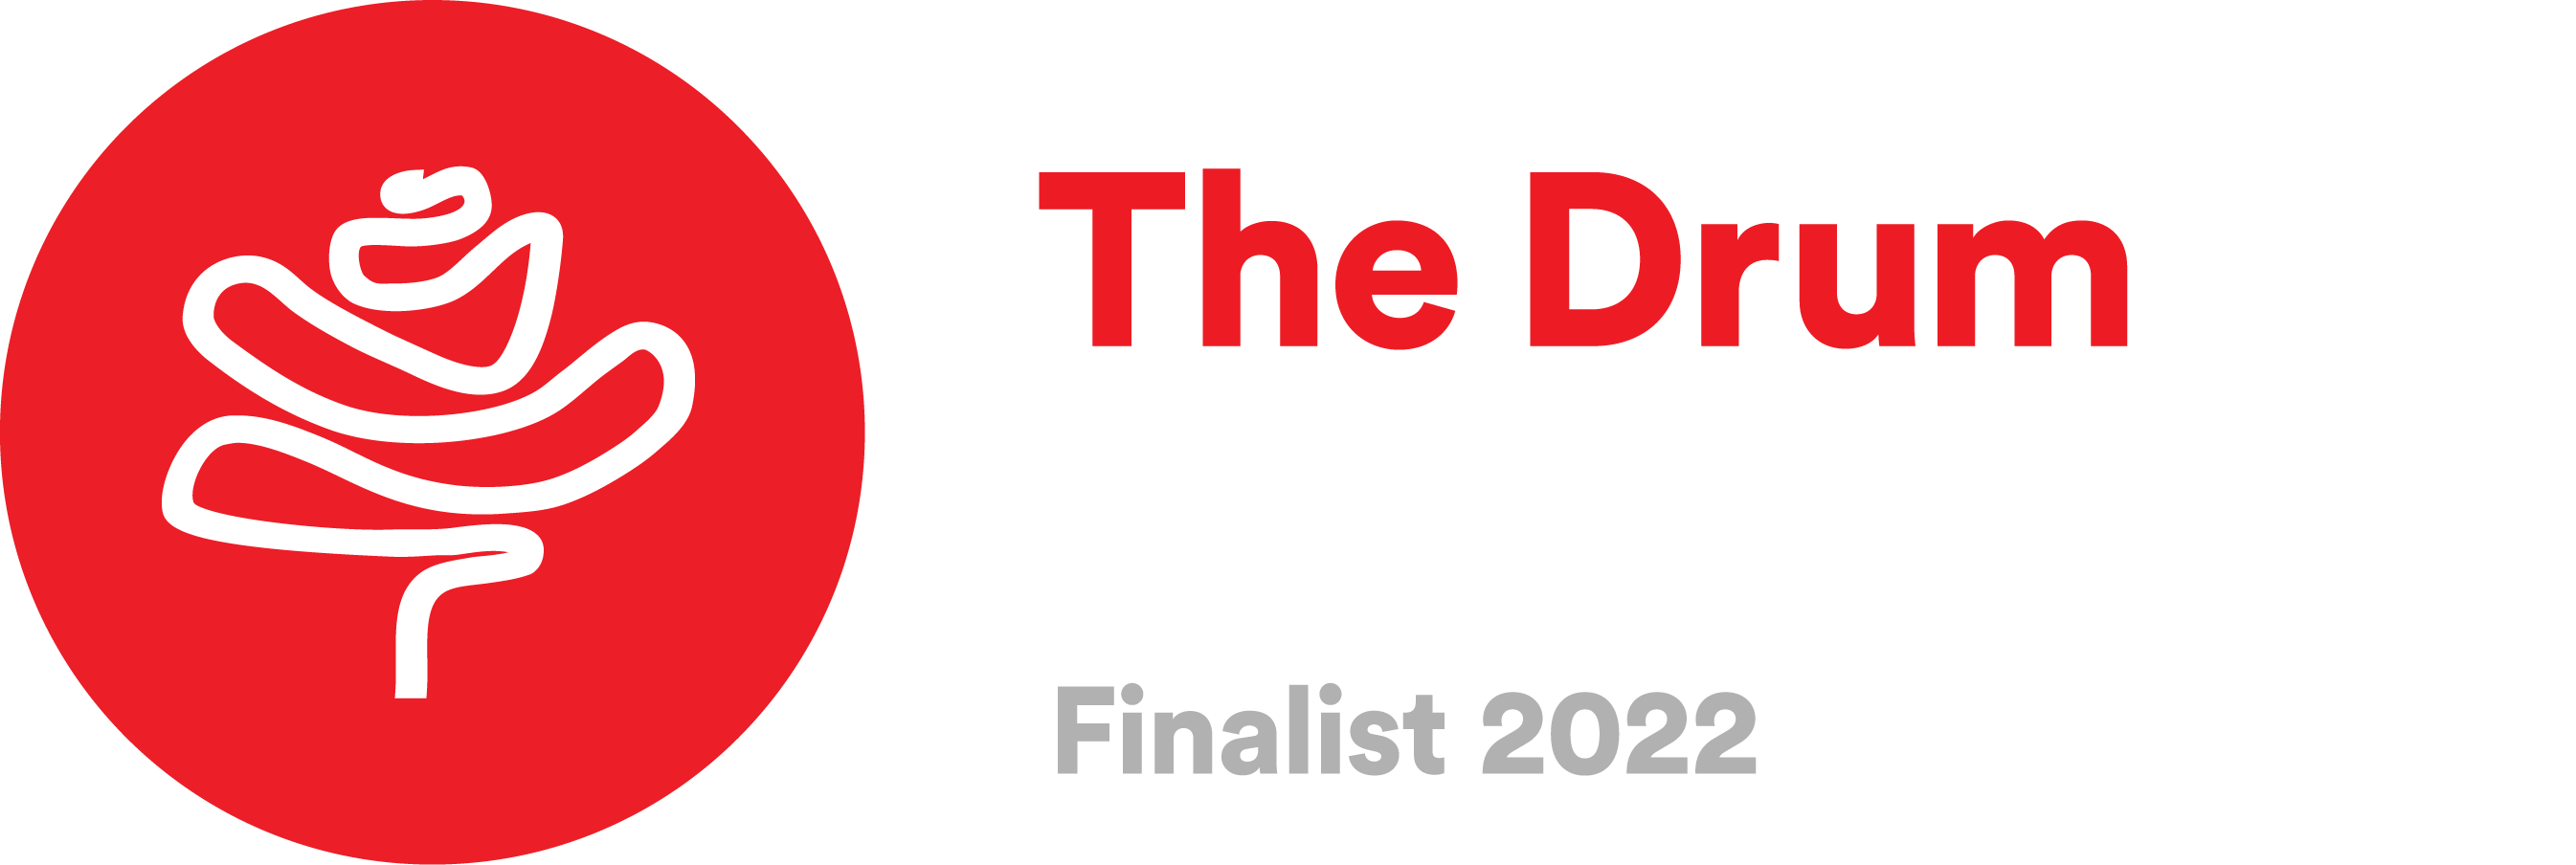 TheDrum_Roses_Award Finalist 2022